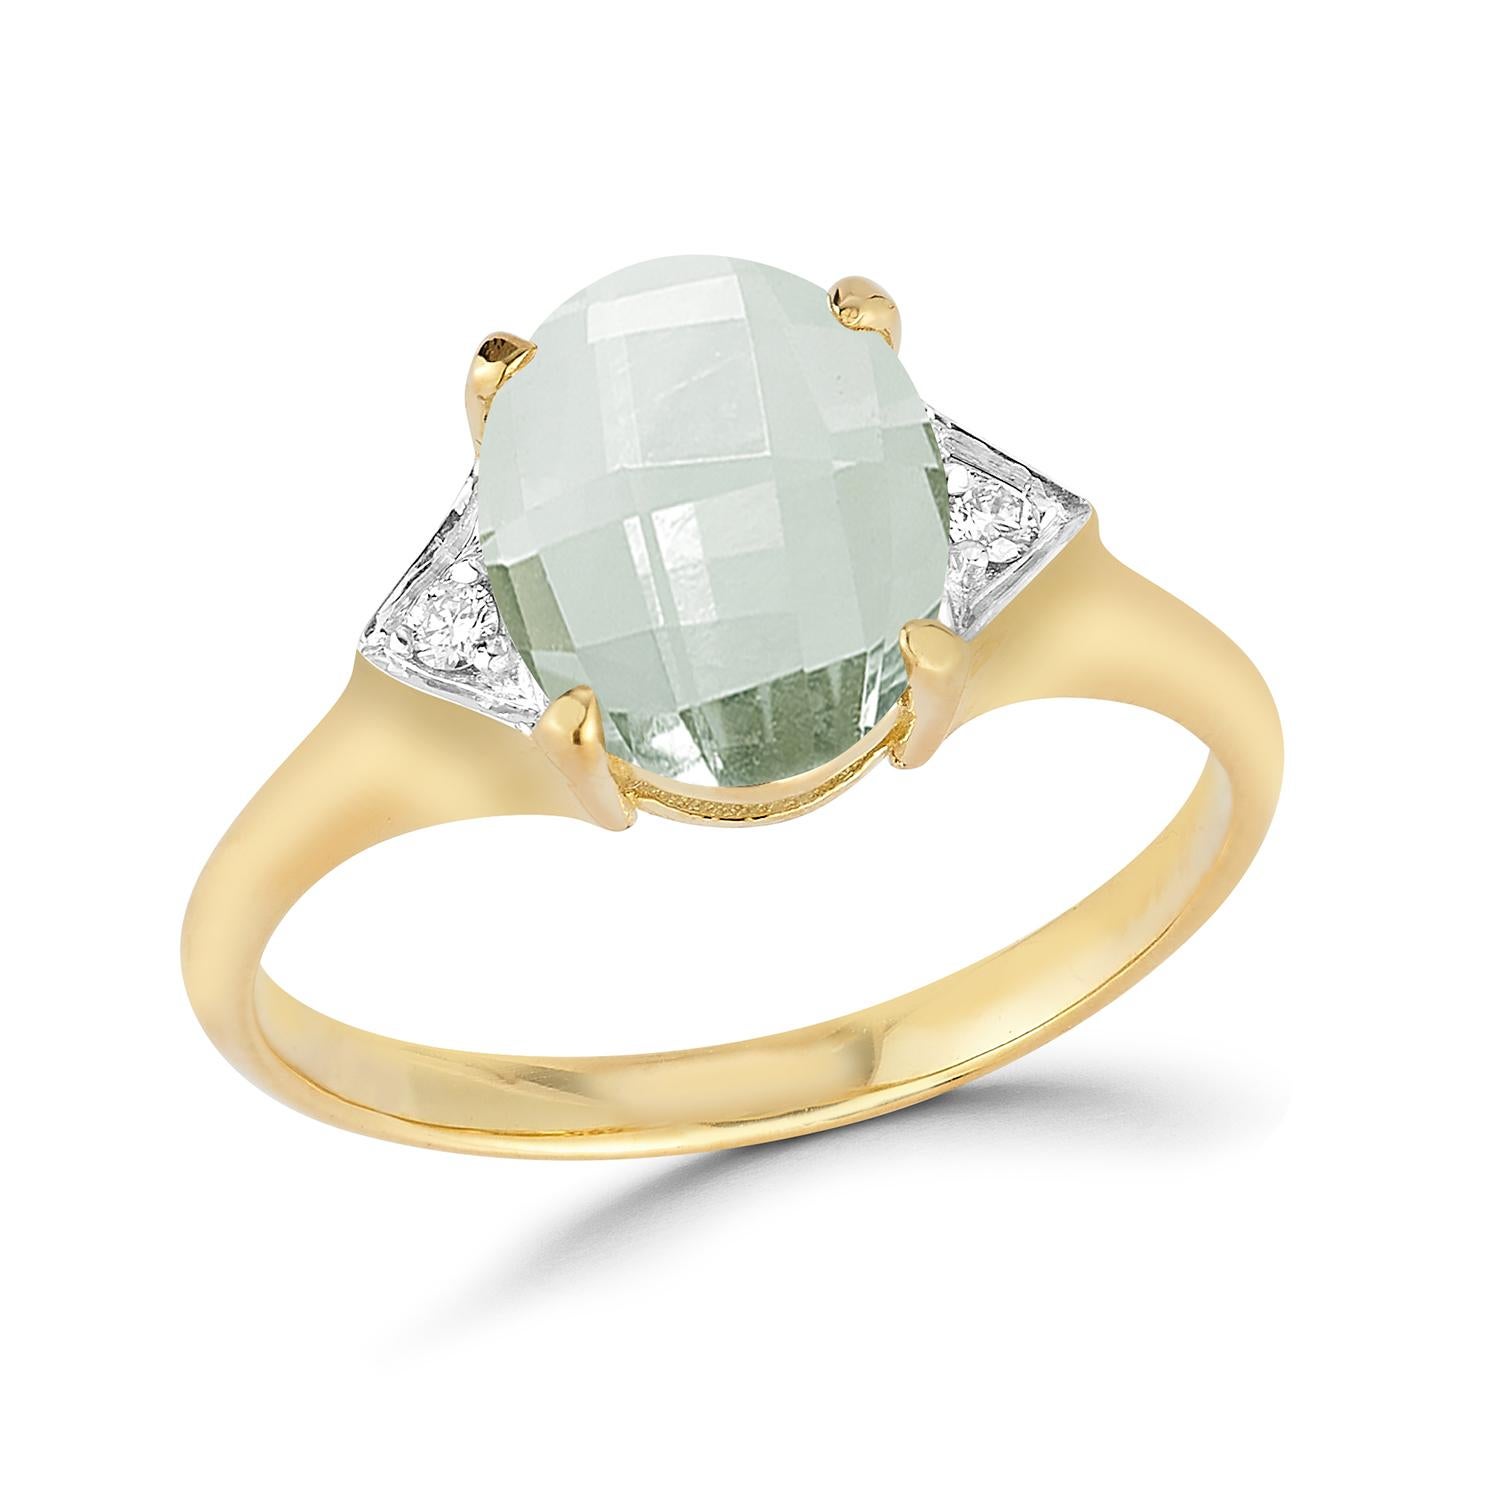 For Sale:  Hand-Crafted 14K Gold 0.05 ct. tw. Diamond & 5.25CT Green Amethyst Cocktail Ring 4